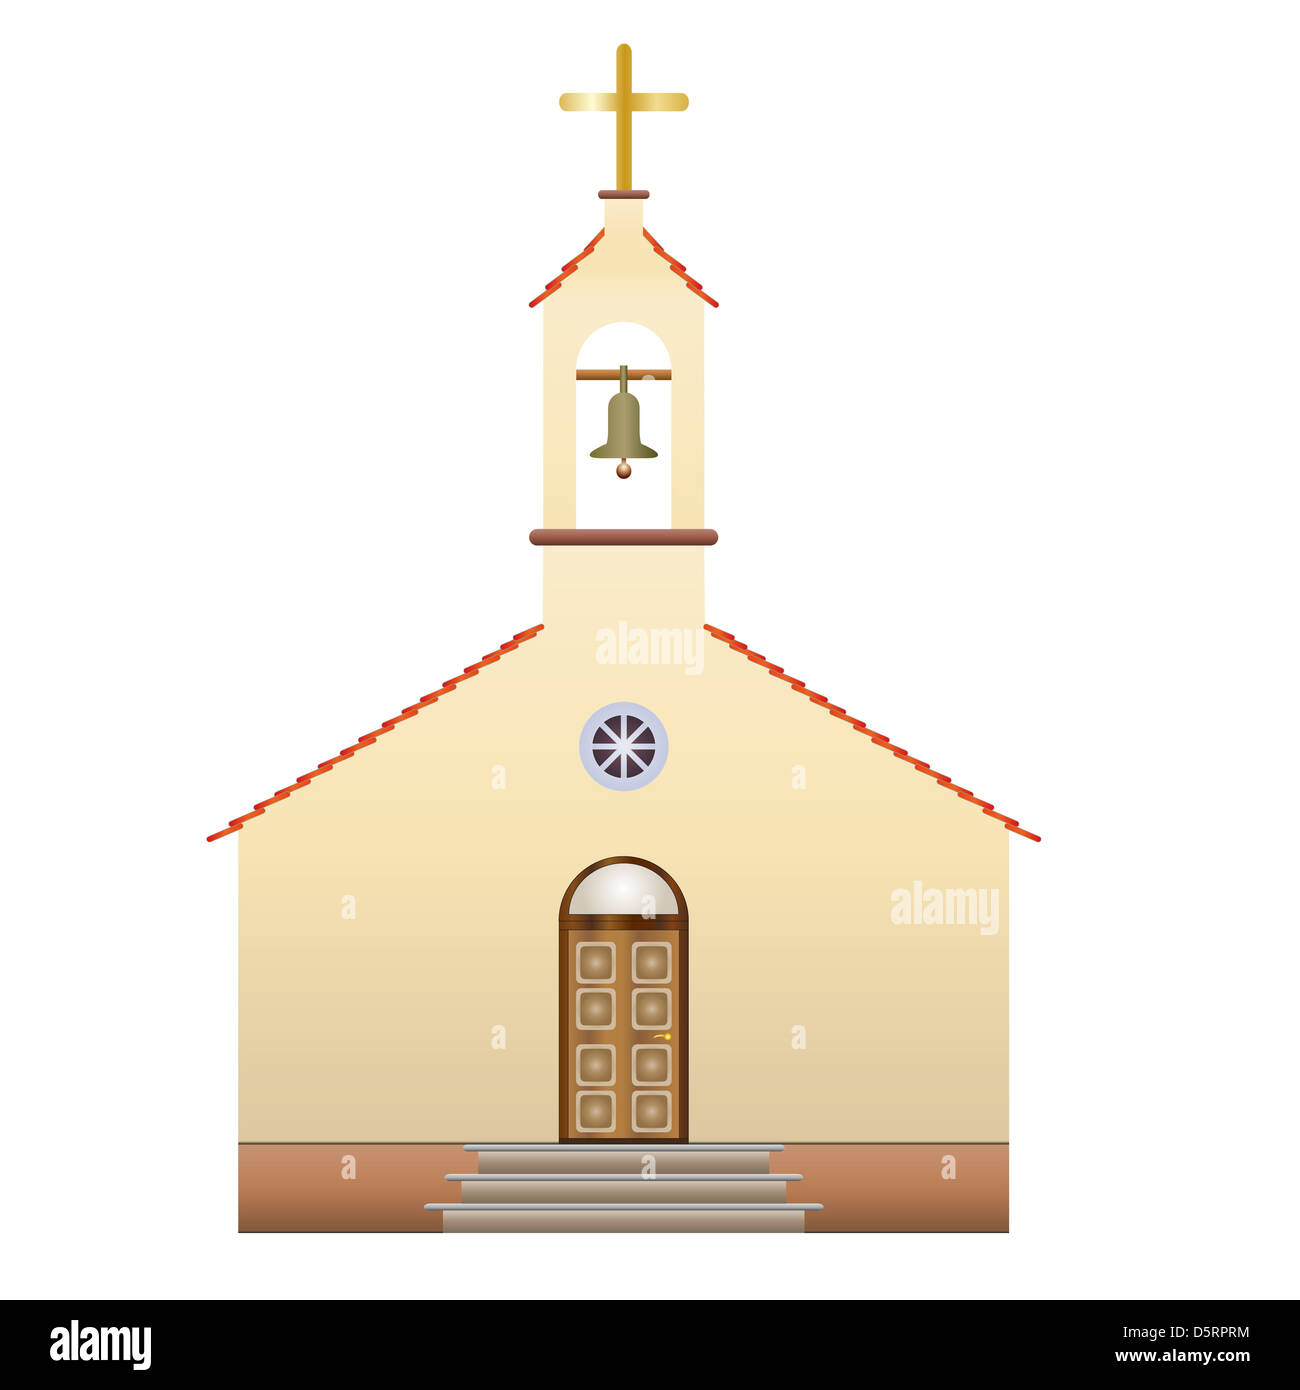 church with a cross and bell, vector illustration Stock Photo